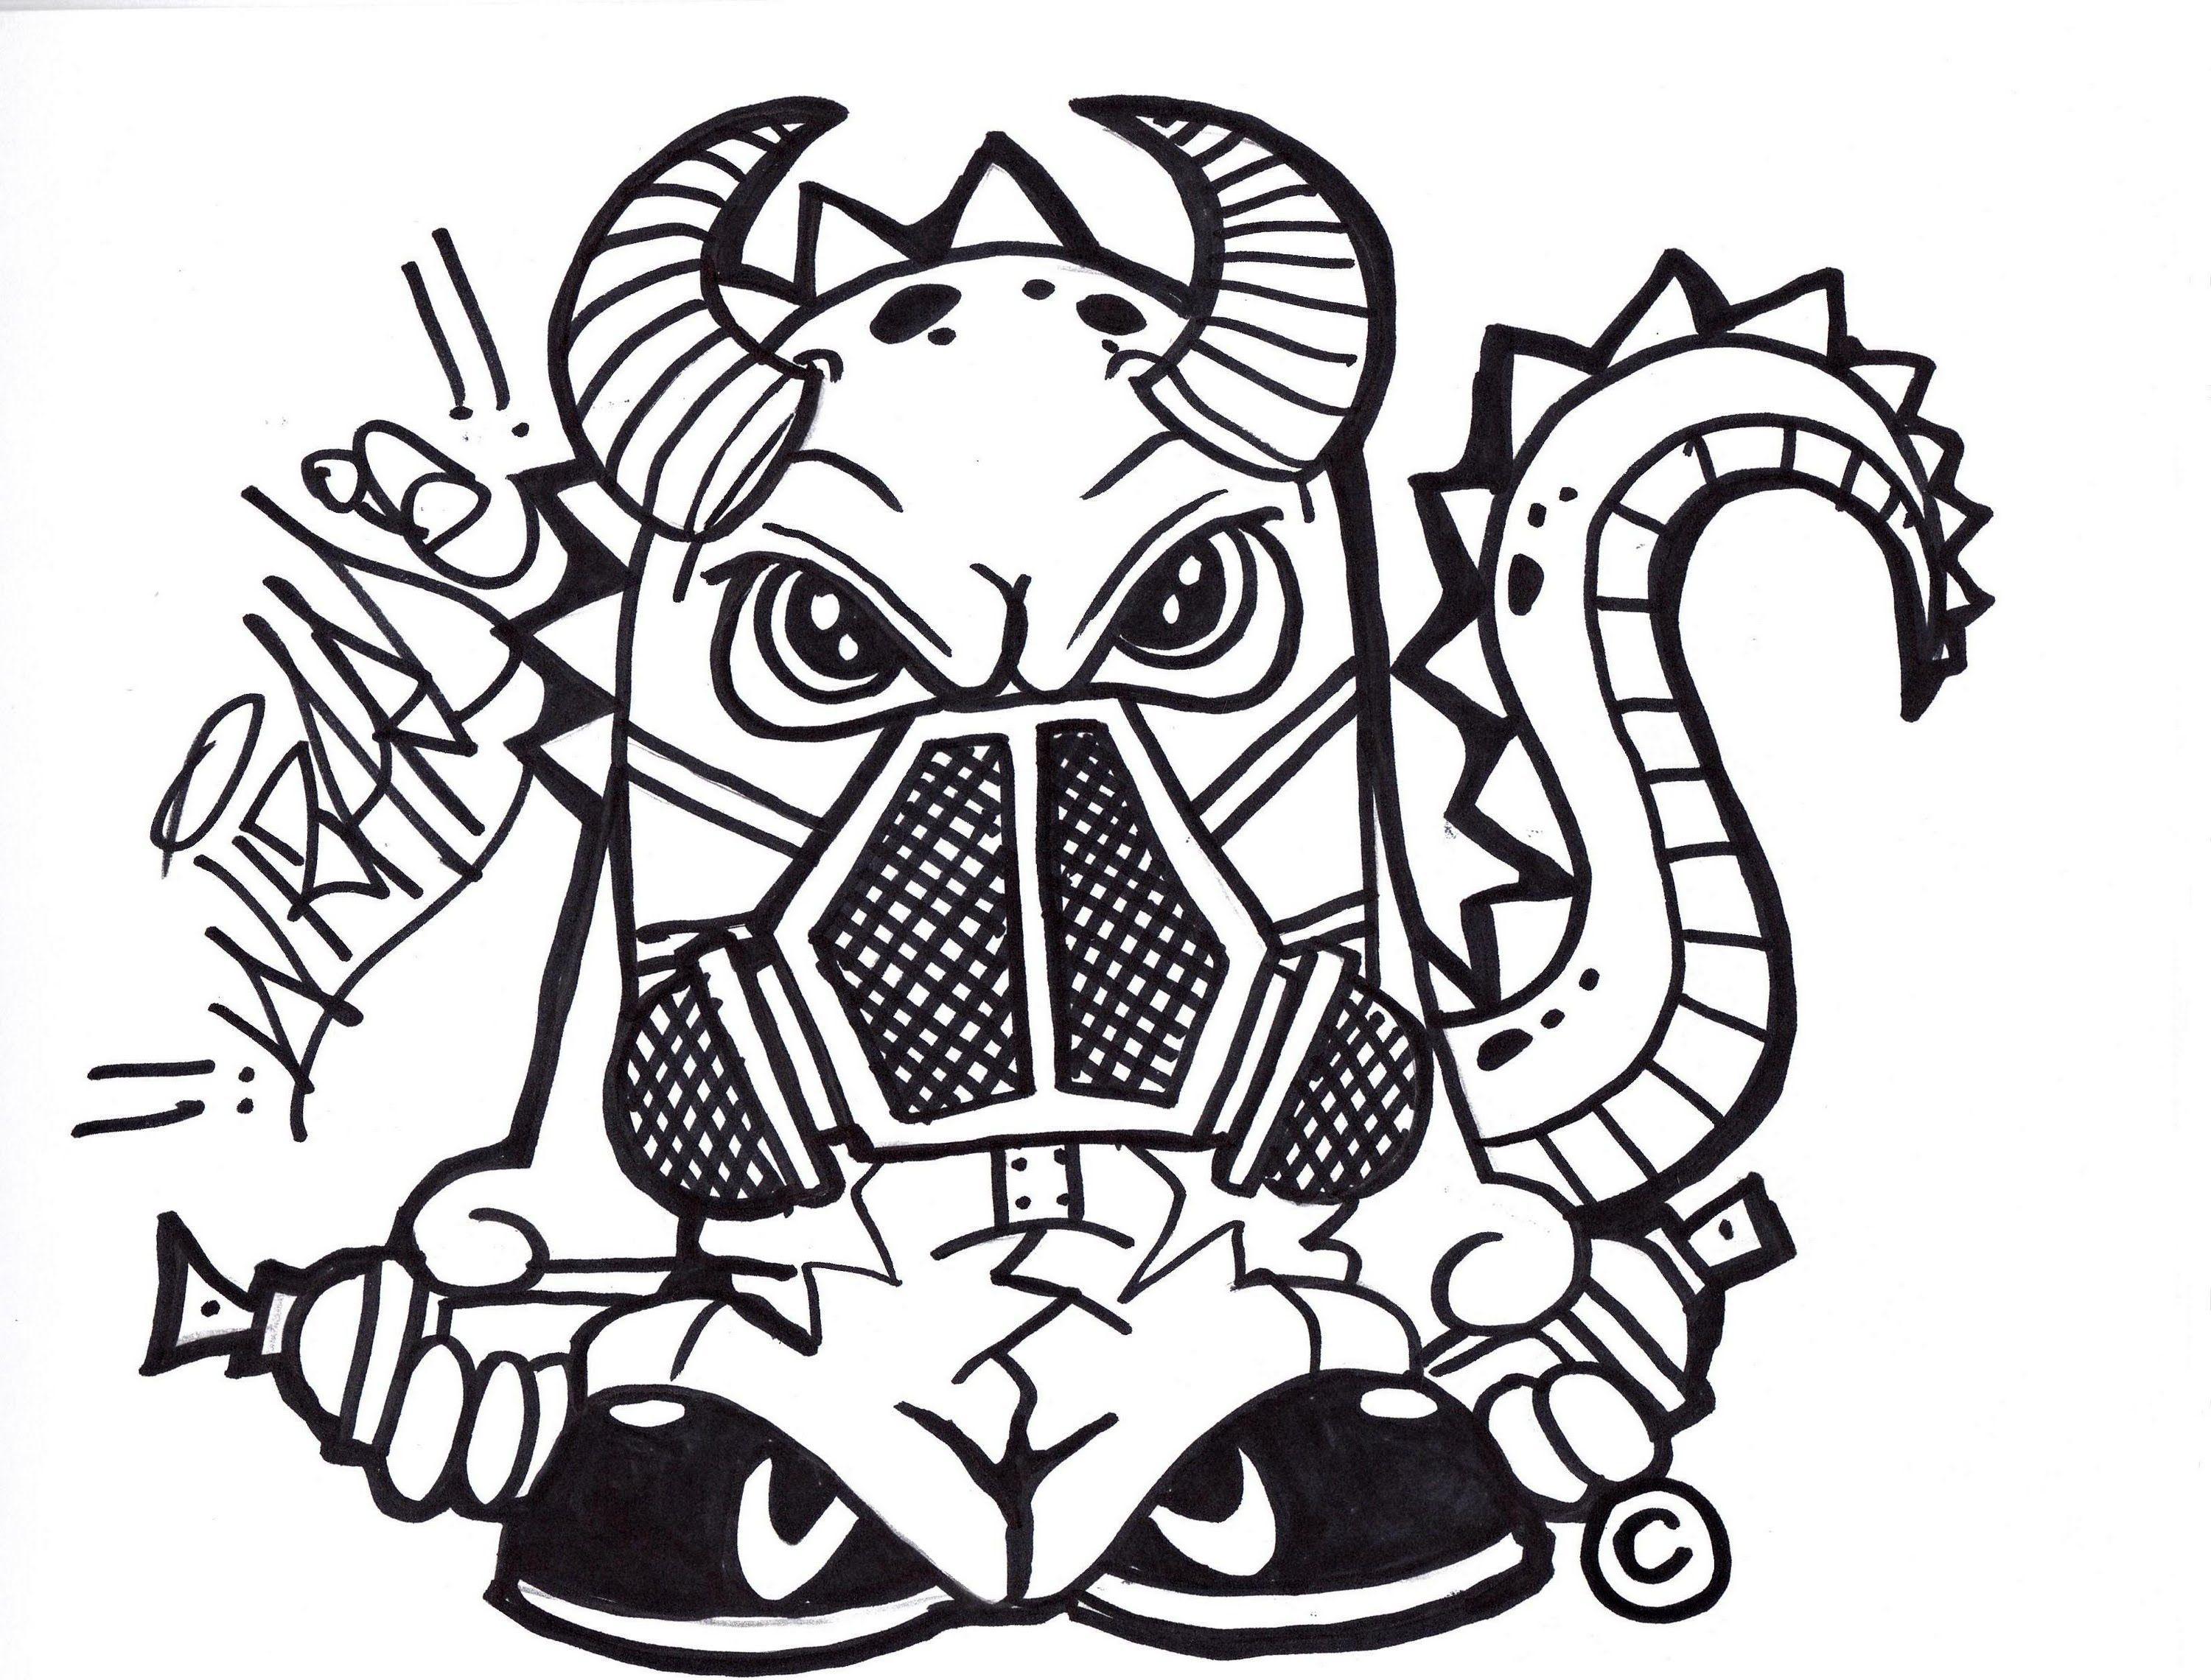 Graffiti Characters Gangster Hd How To Draw A Dragon With A Gas Mask